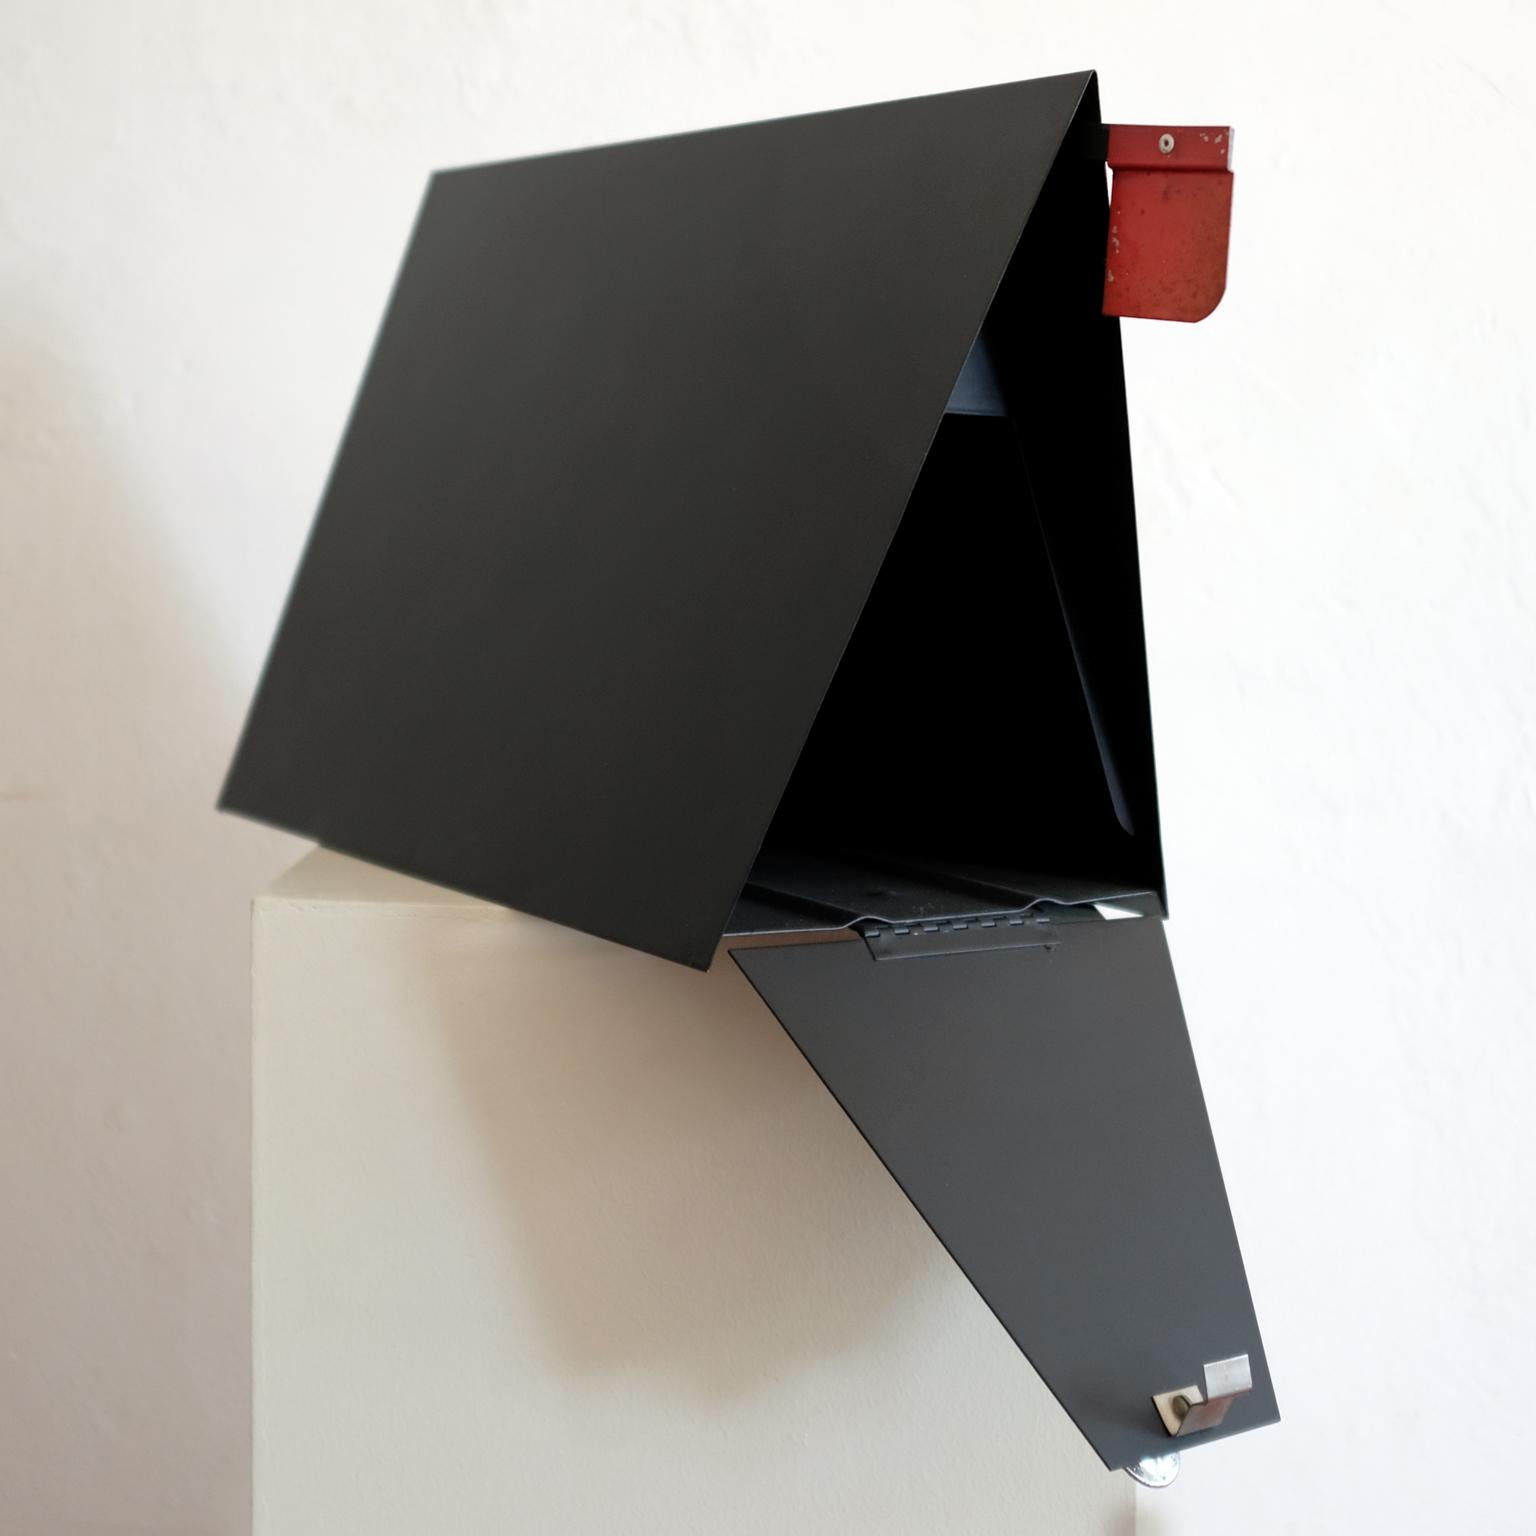 A-frame metal mailbox by Babco. Produced in the 1950s in Los Angeles California. It includes a retractable red flag to notify the postal carrier of outgoing mail.